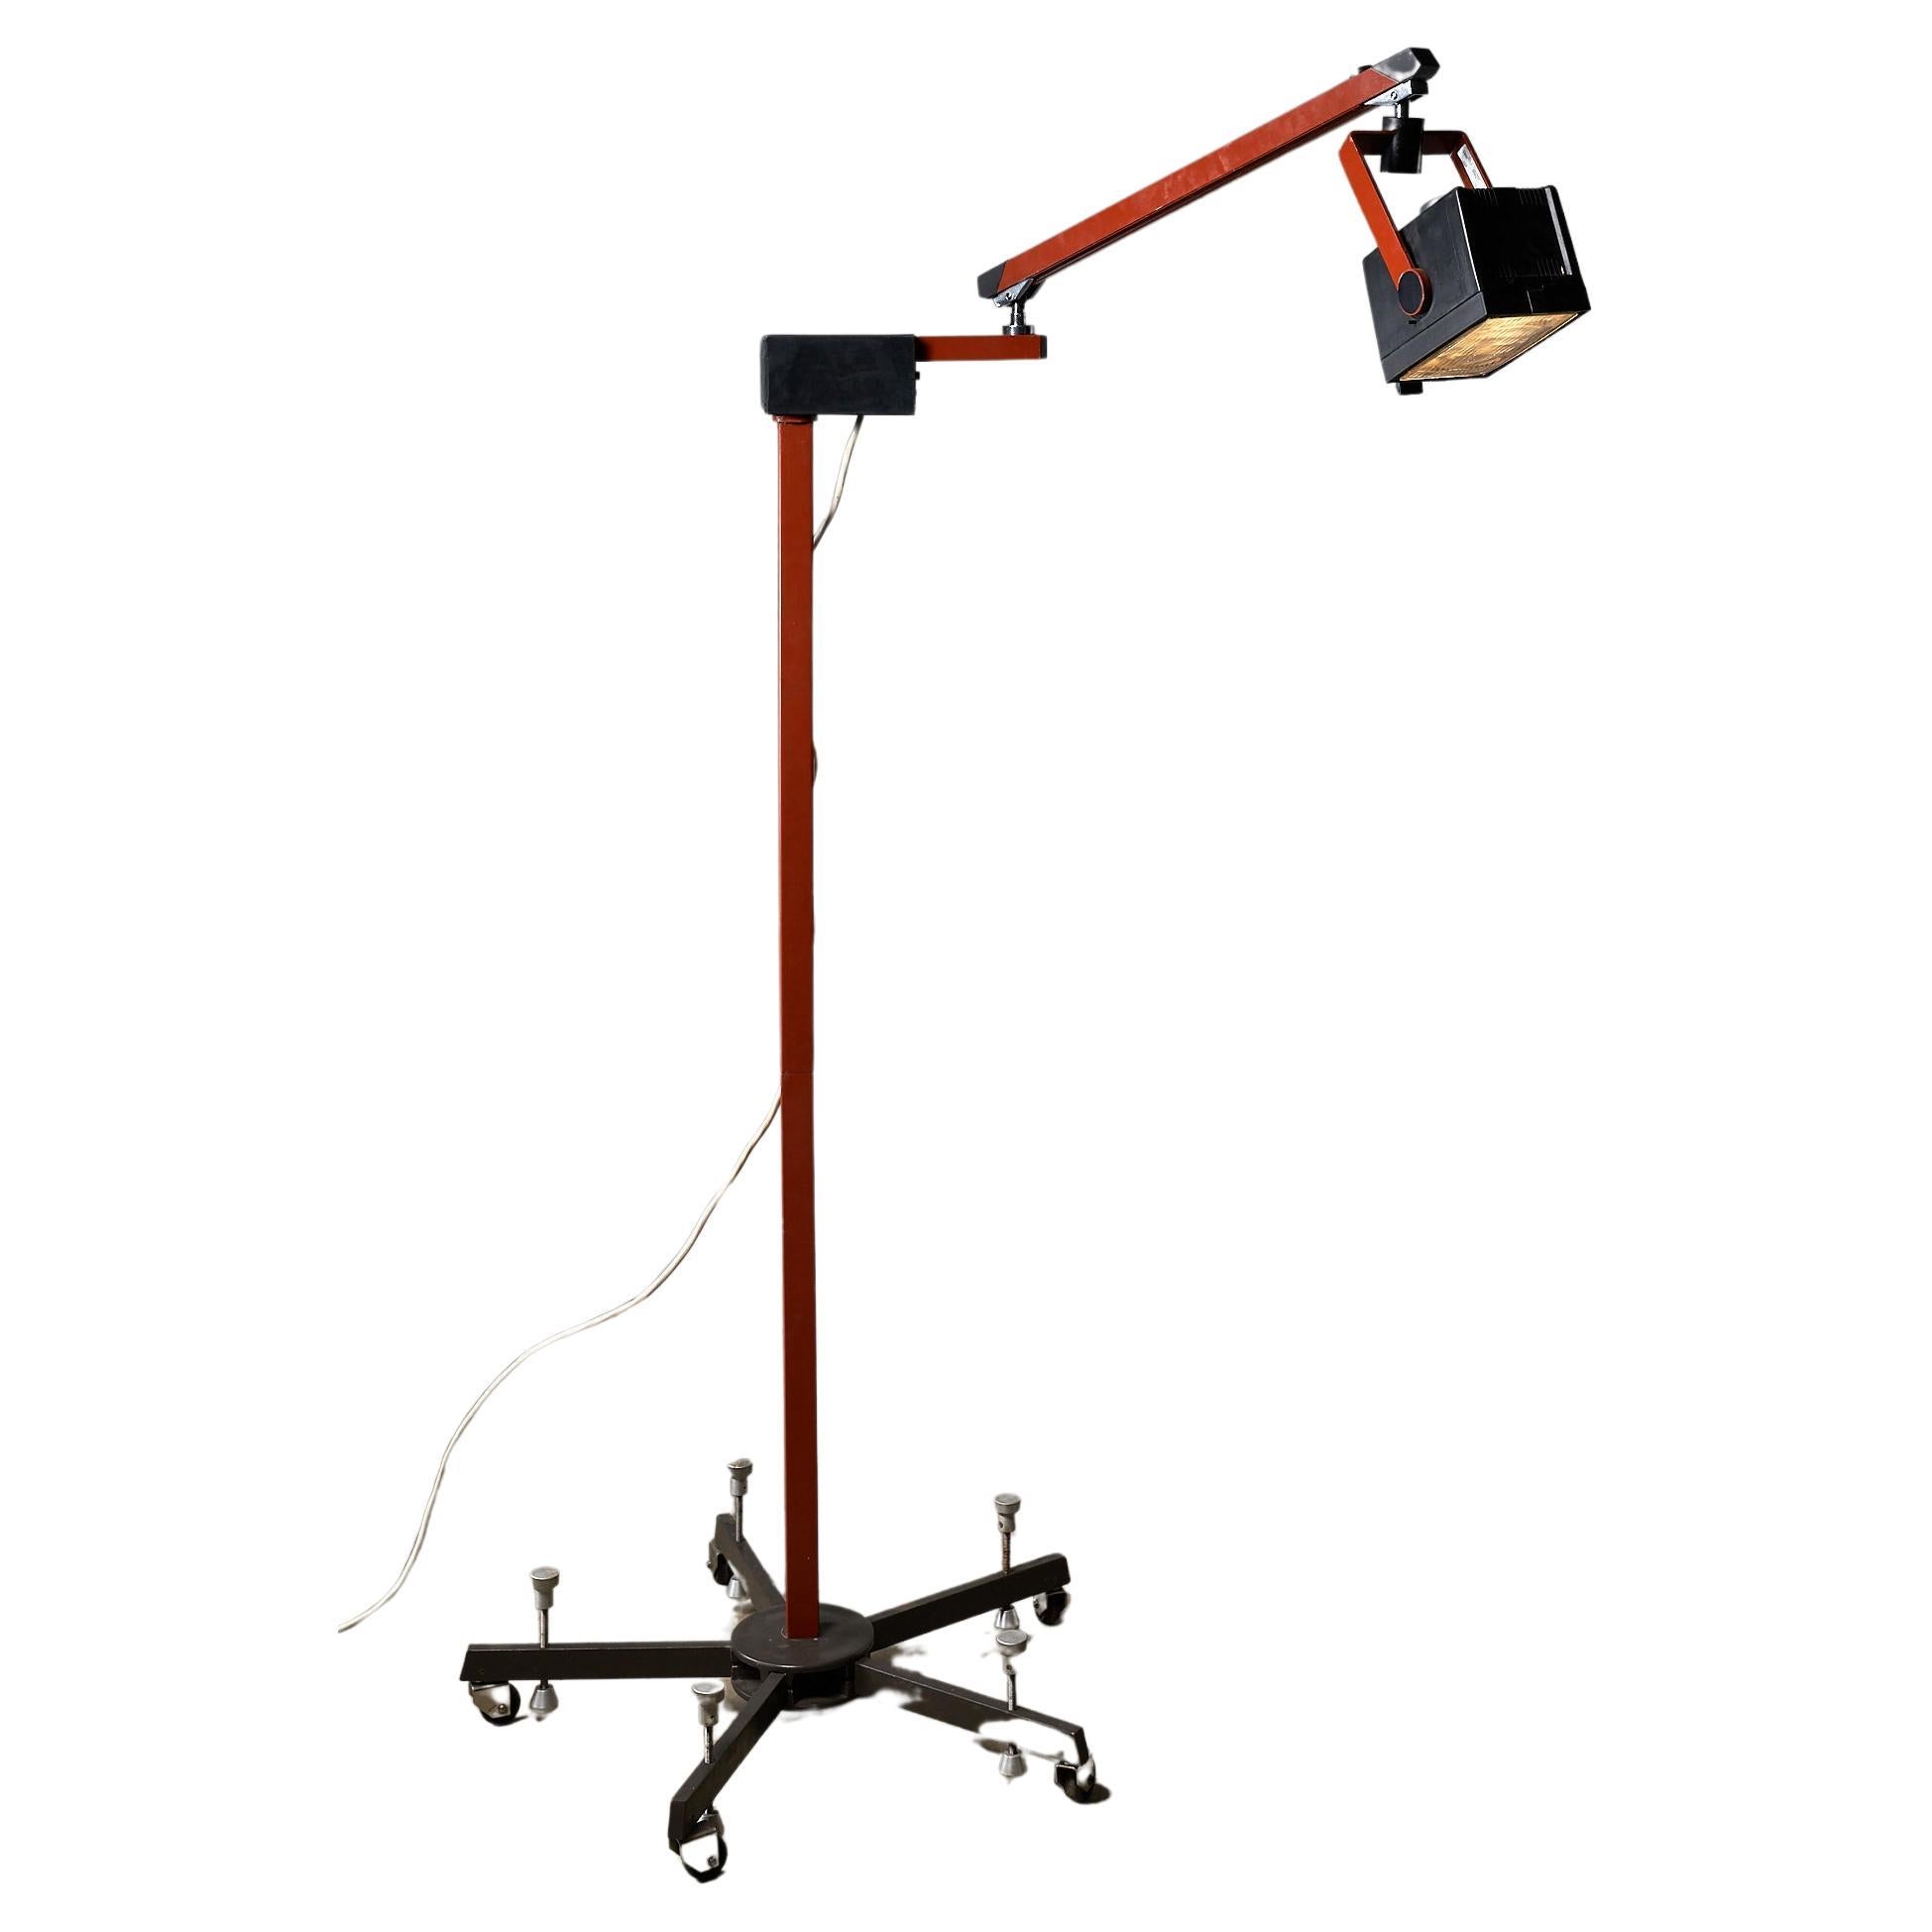 We offer 4 of these medical industrial floor lamps, boasting a remarkable functional design. The upper arm of these lamps can pivot in various directions, providing versatile lighting options. Whether used as directional light or as an eye-catching